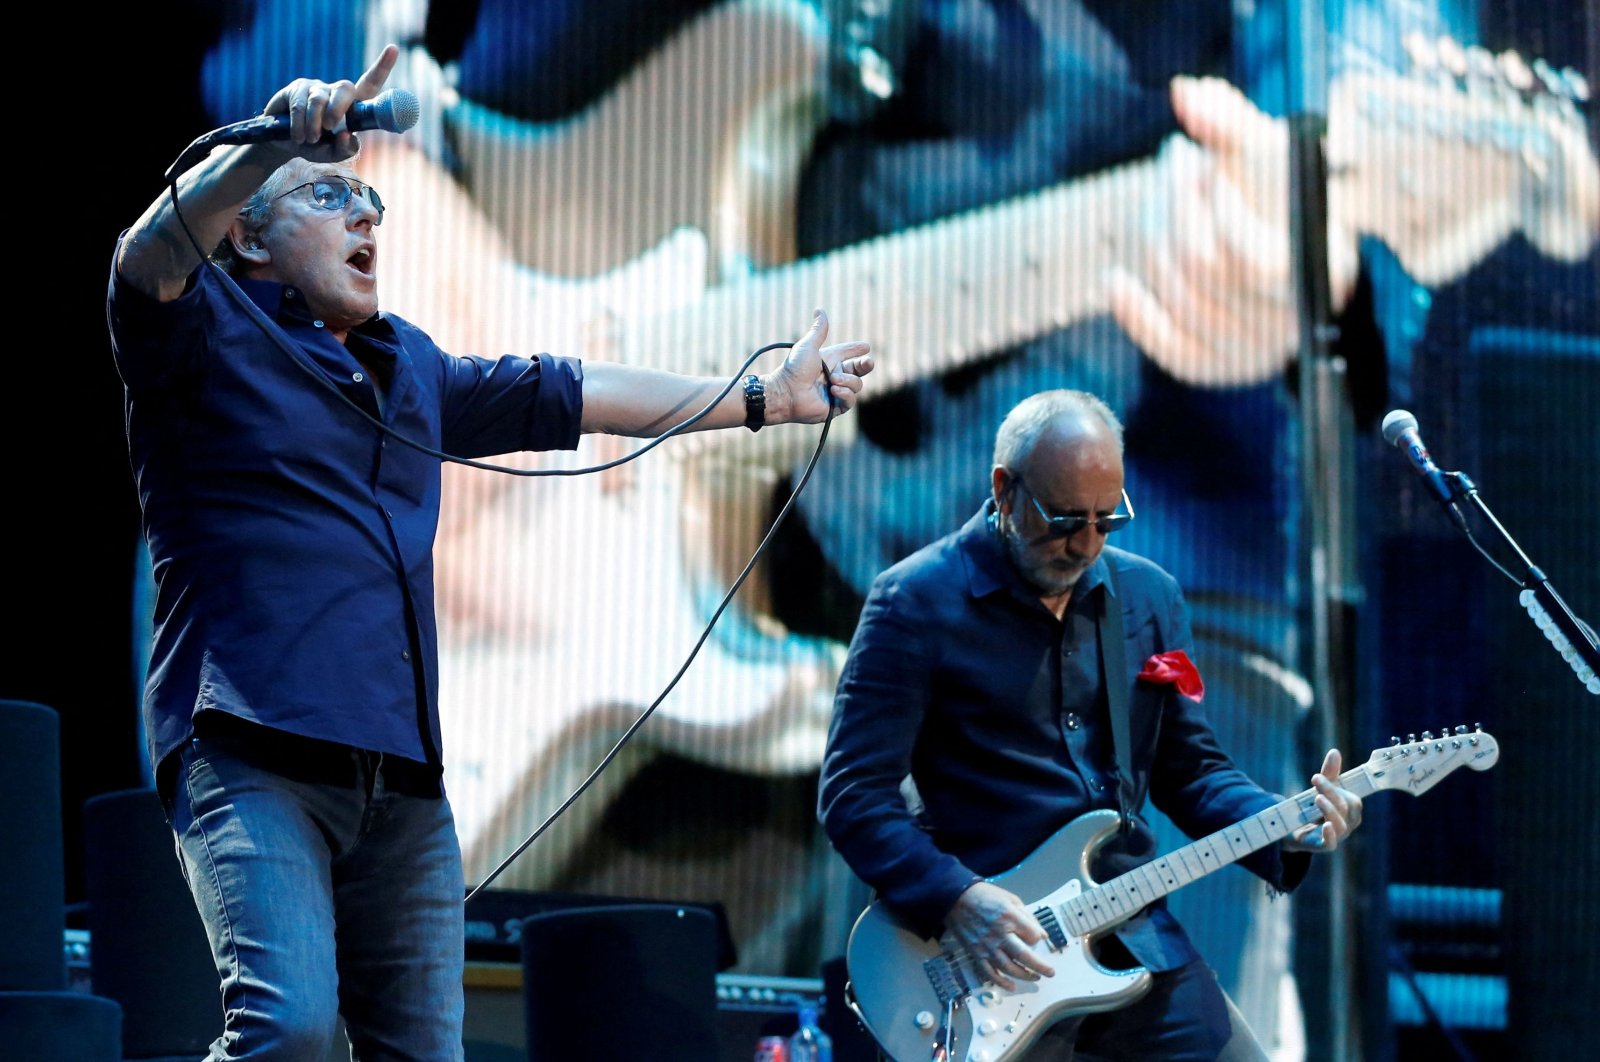 Roger Daltrey (L) and Pete Townshend of The Who perform at Desert Trip music festival at Empire Polo Club in Indio, California, U.S., Oct. 9, 2016. (REUTERS Photo)